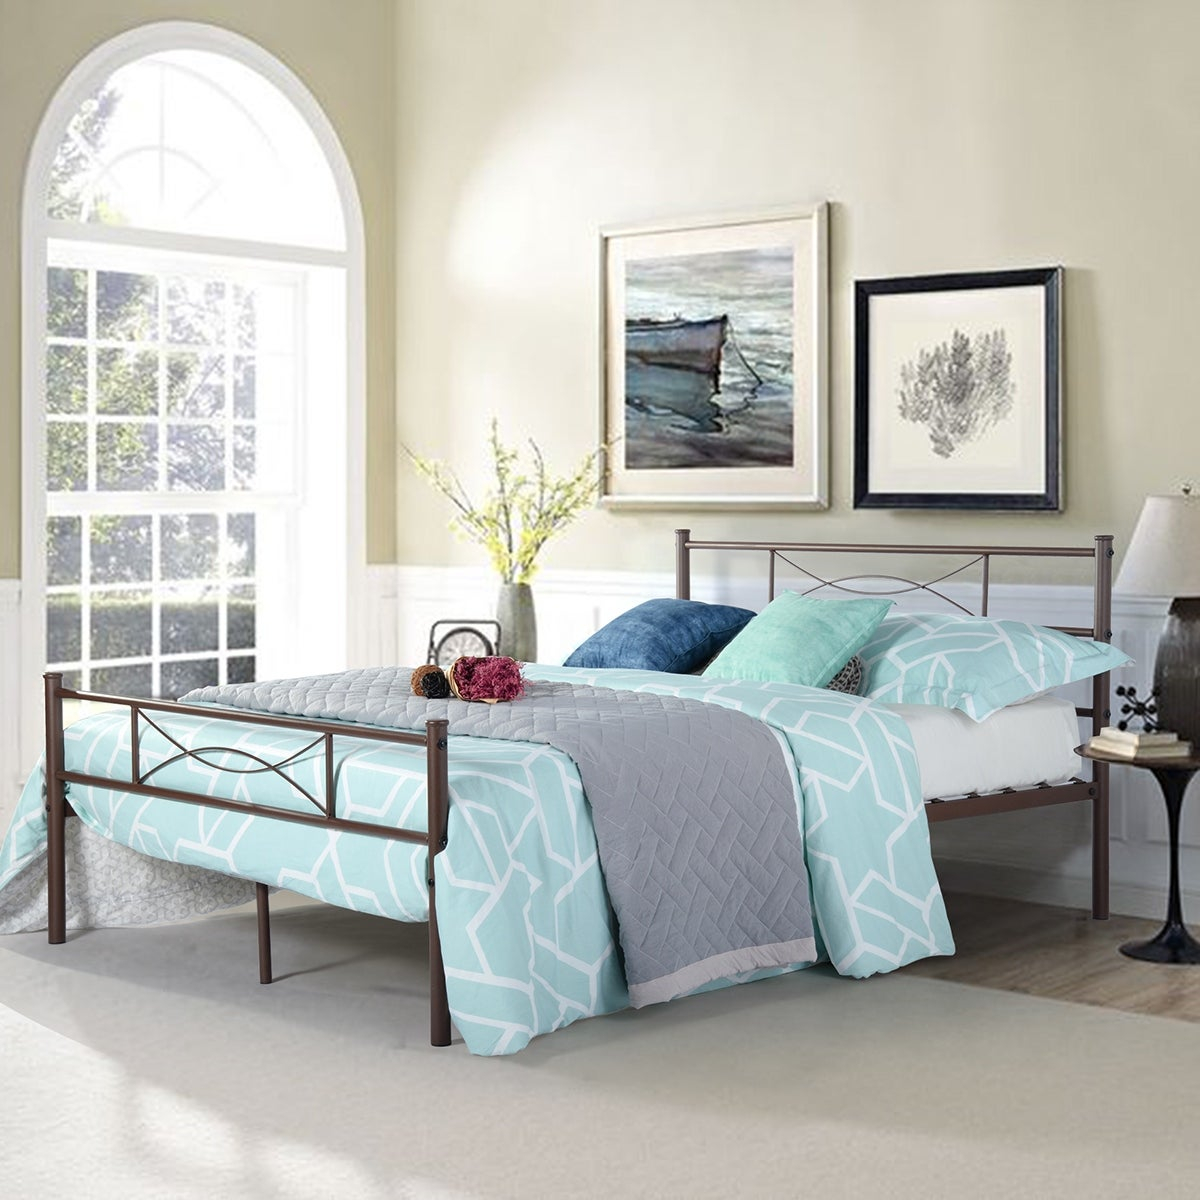 Easy Set Up Full Metal Bed Frame Bedroom Furniture With Headboard Coffee regarding size 1200 X 1200